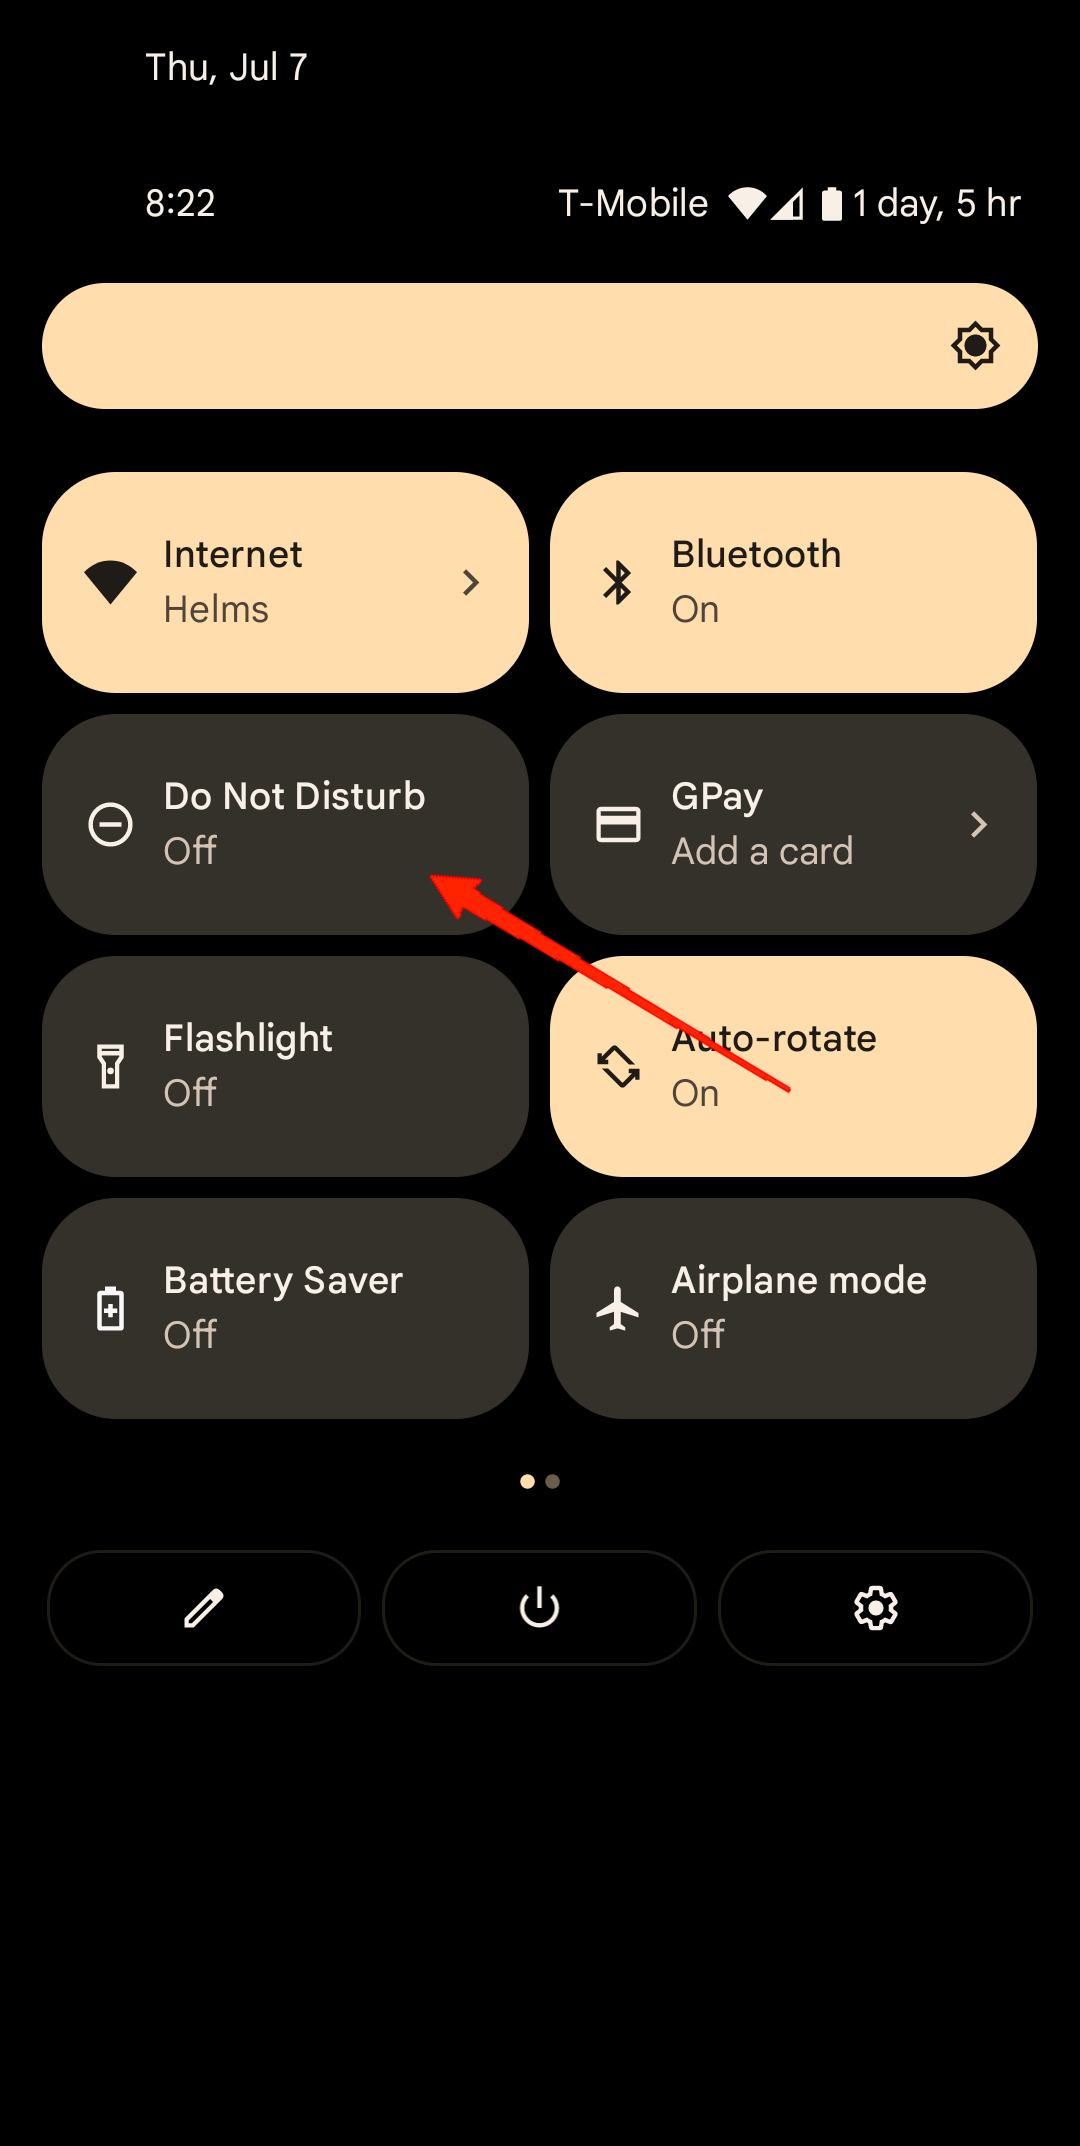 simply tap on the option once again to turn it off.